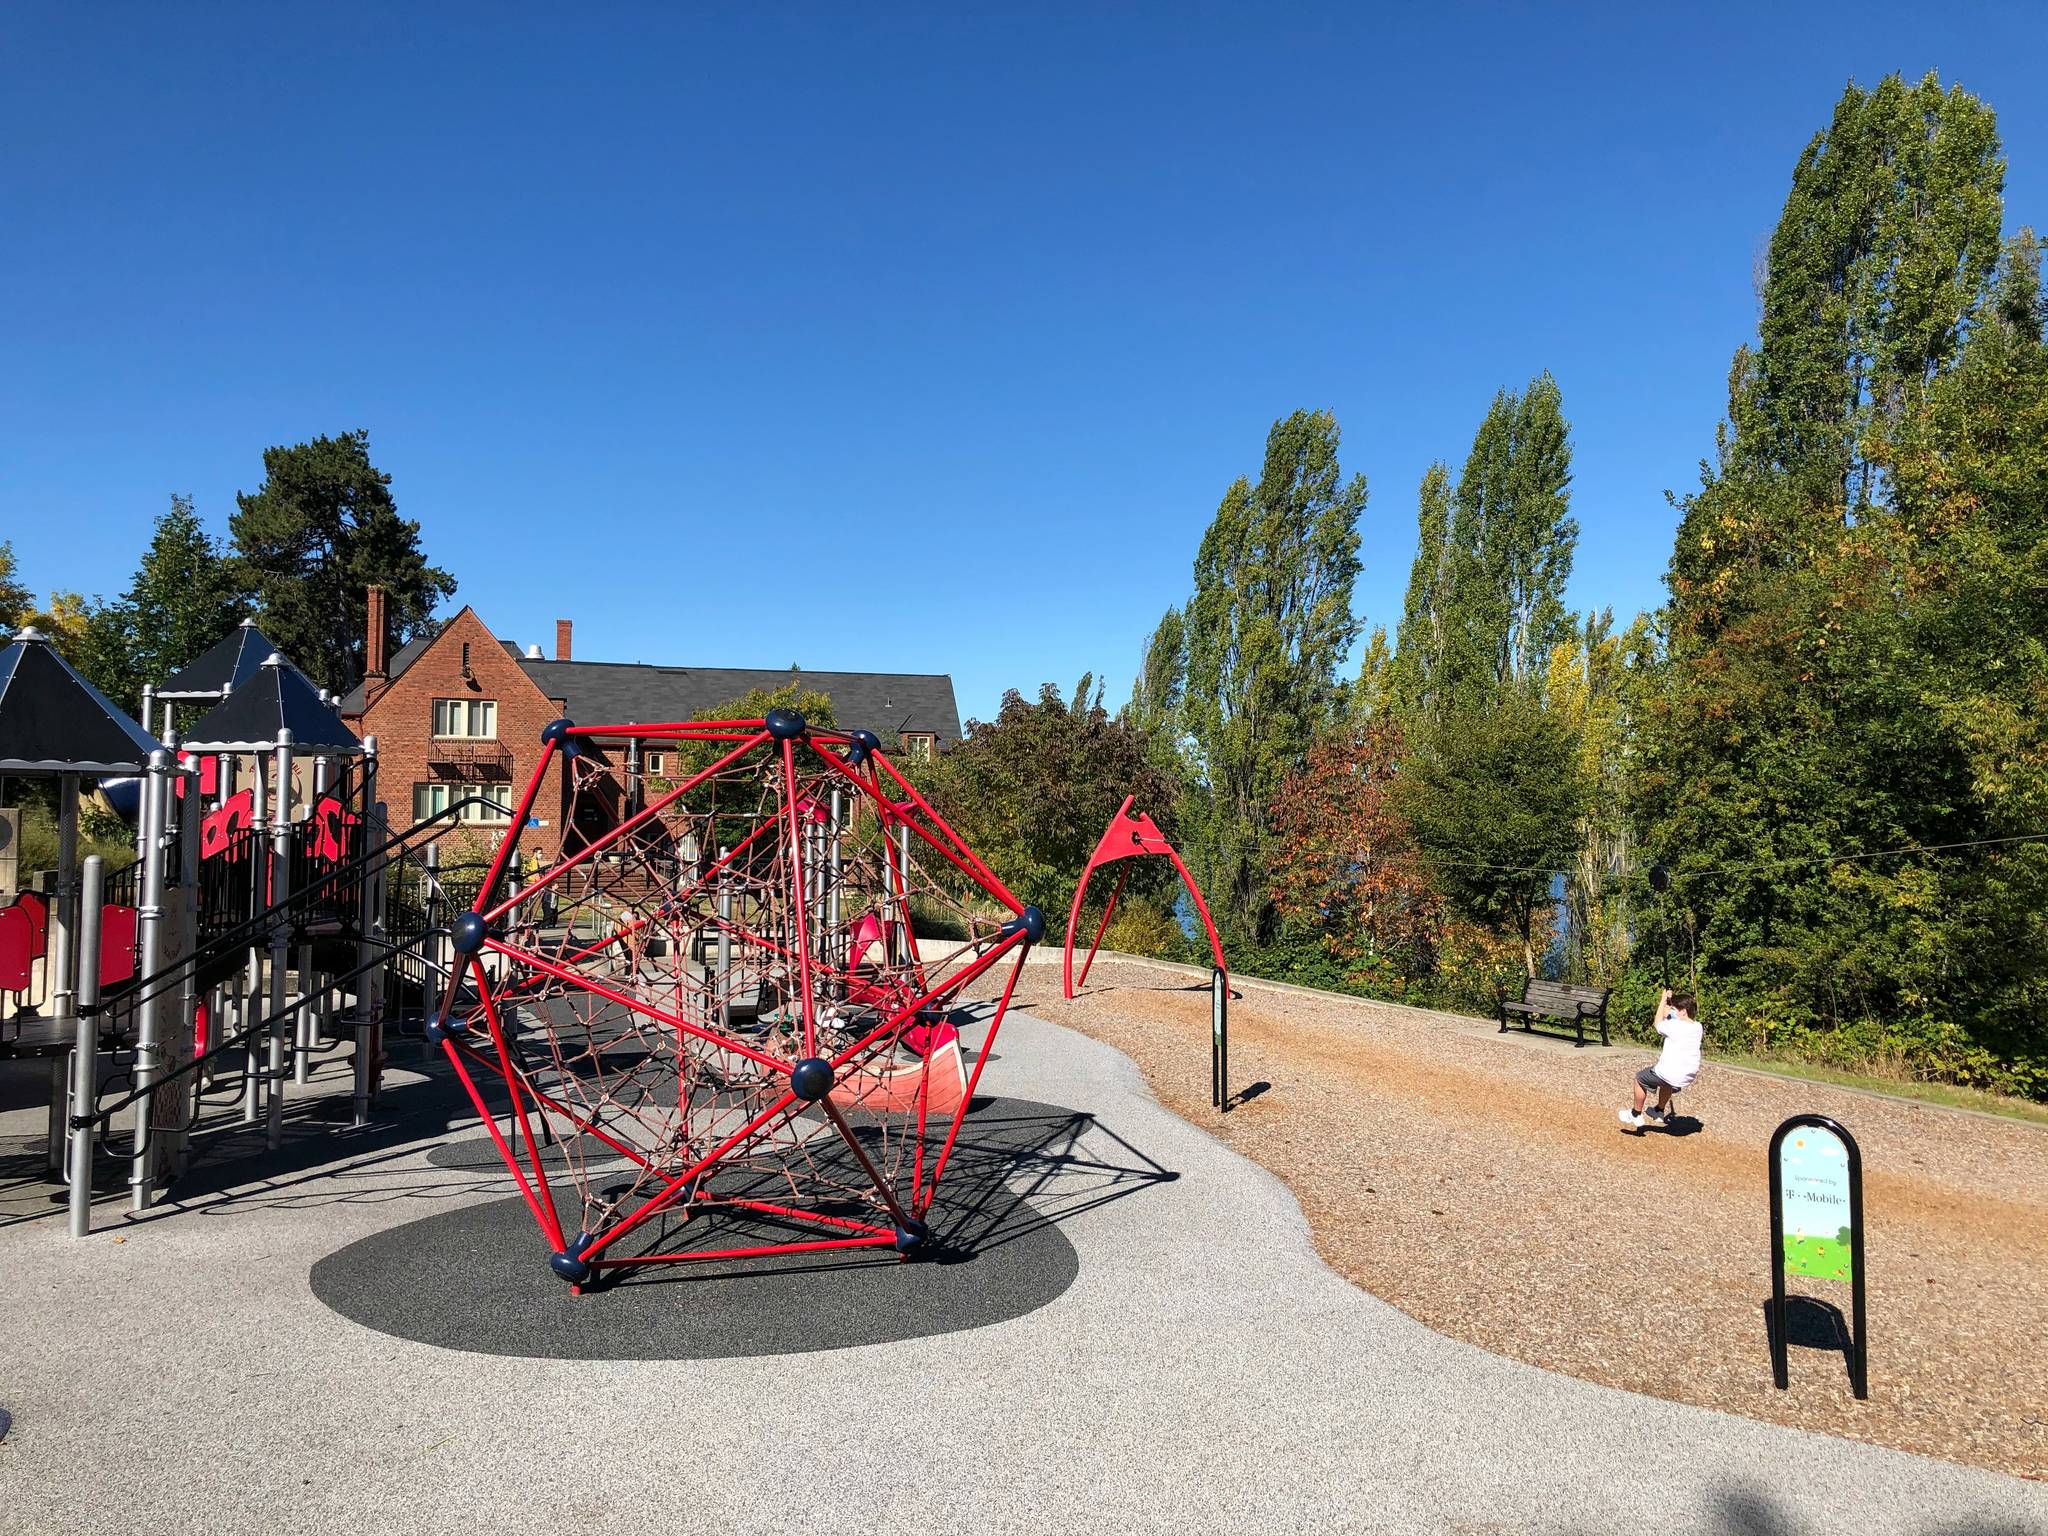 Mercer Island’s parks maintenance staff reopened playgrounds throughout the Island on Sept. 24. Here’s a capture at Luther Burbank Park on Sept. 29. Photo courtesy of Alaine Sommargren